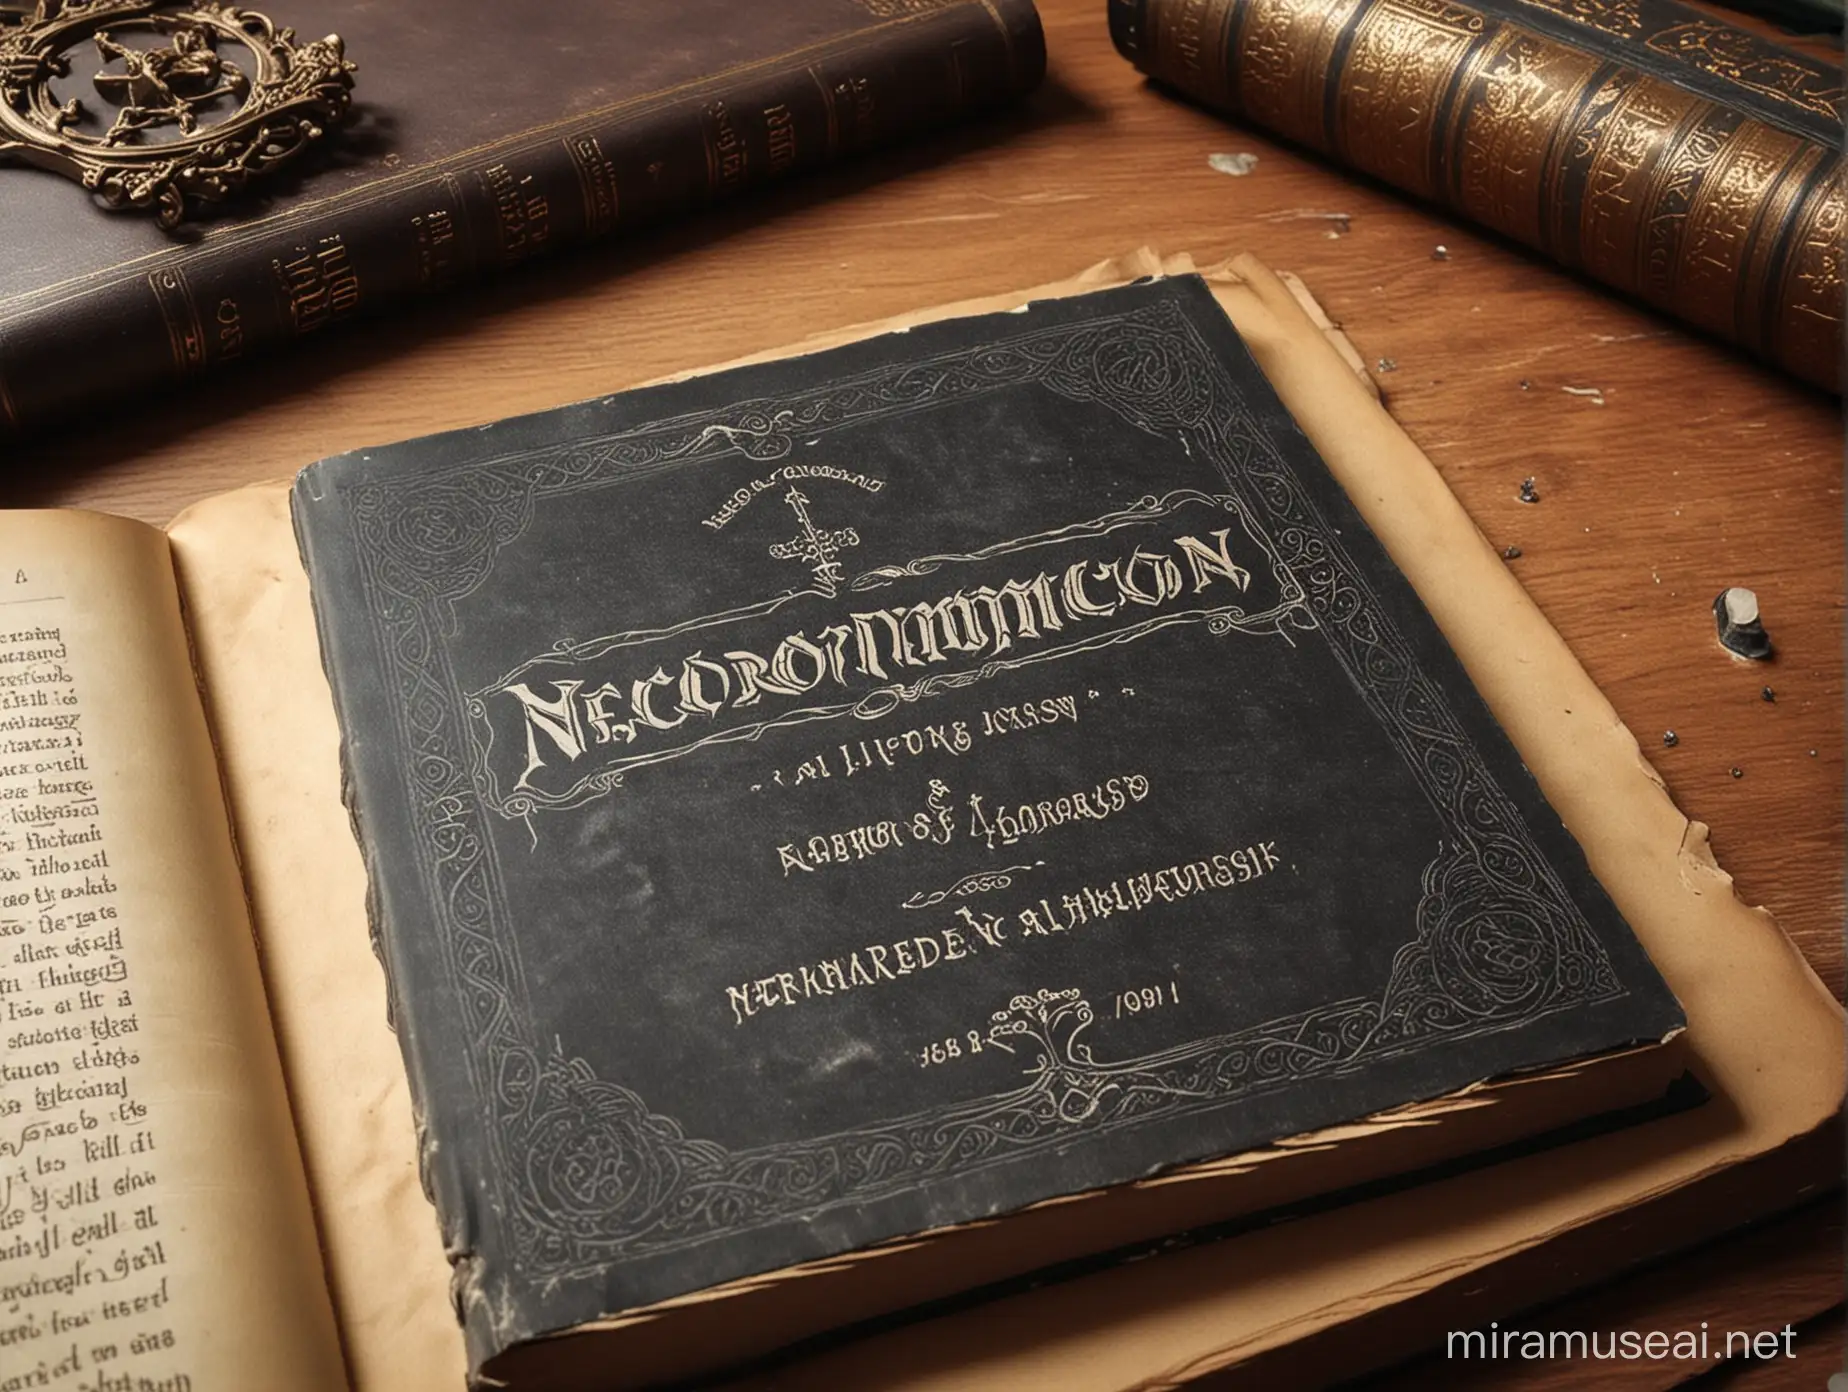 Book opened on title page, Called Necronomicon, Author Ablud Alhazred. Lying on desk in Victorian Library.